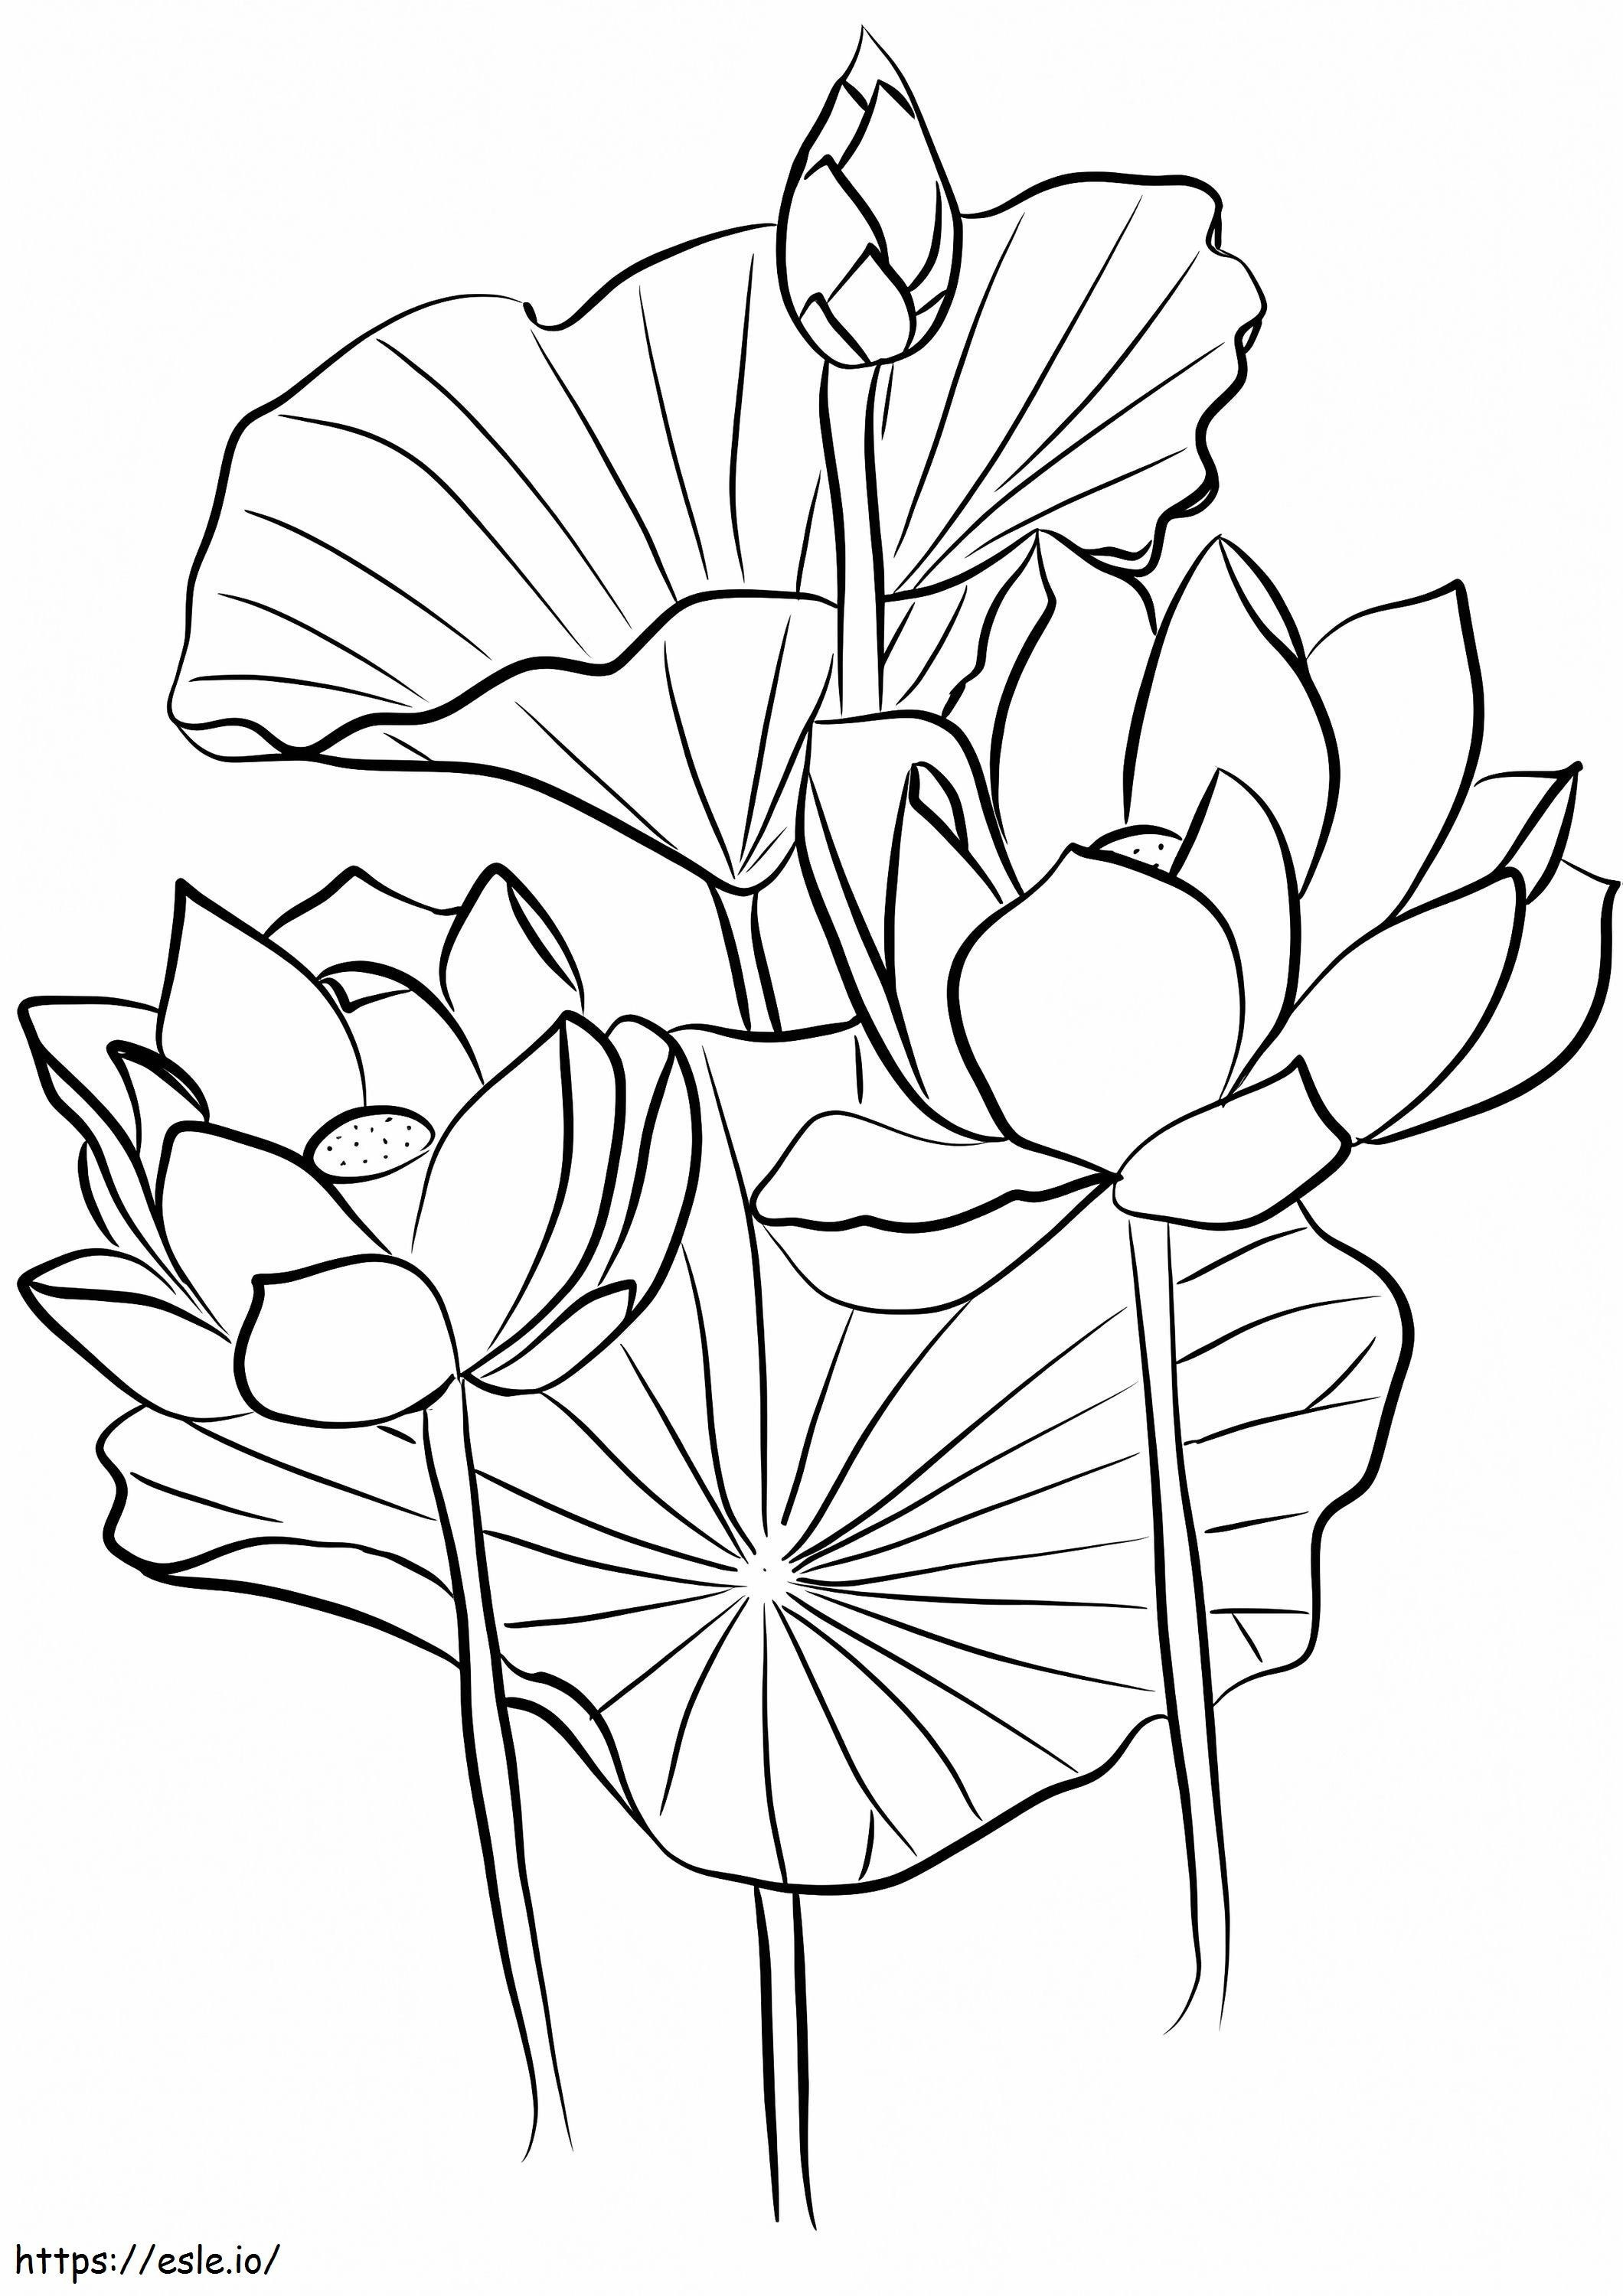 Three Lotuses coloring page